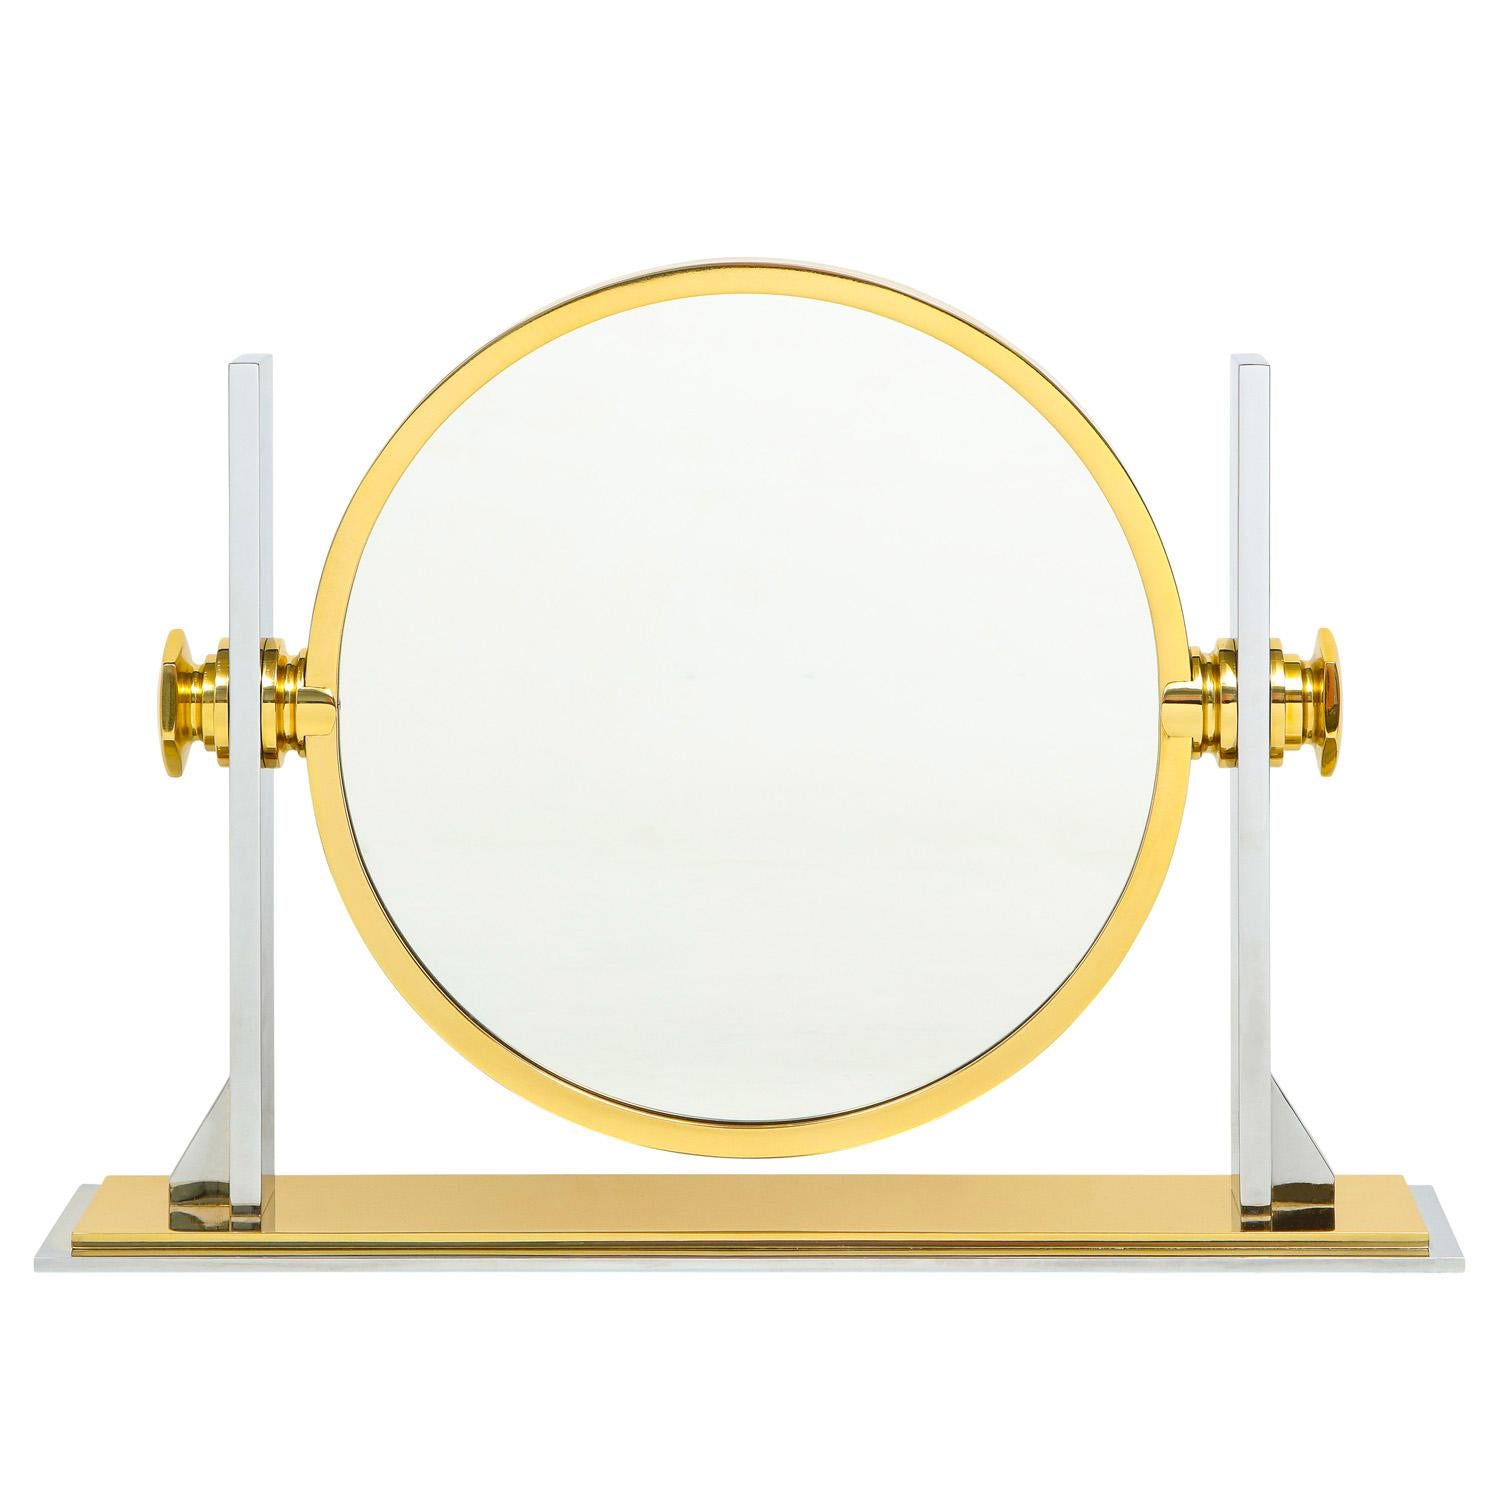 Meticulously crafted vanity/dressing table mirror in polished steel and brass with magnifier on one side and mirror on the other by Karl Springer, American 1980's. This mirror has been completely restored - polished and lacquered.